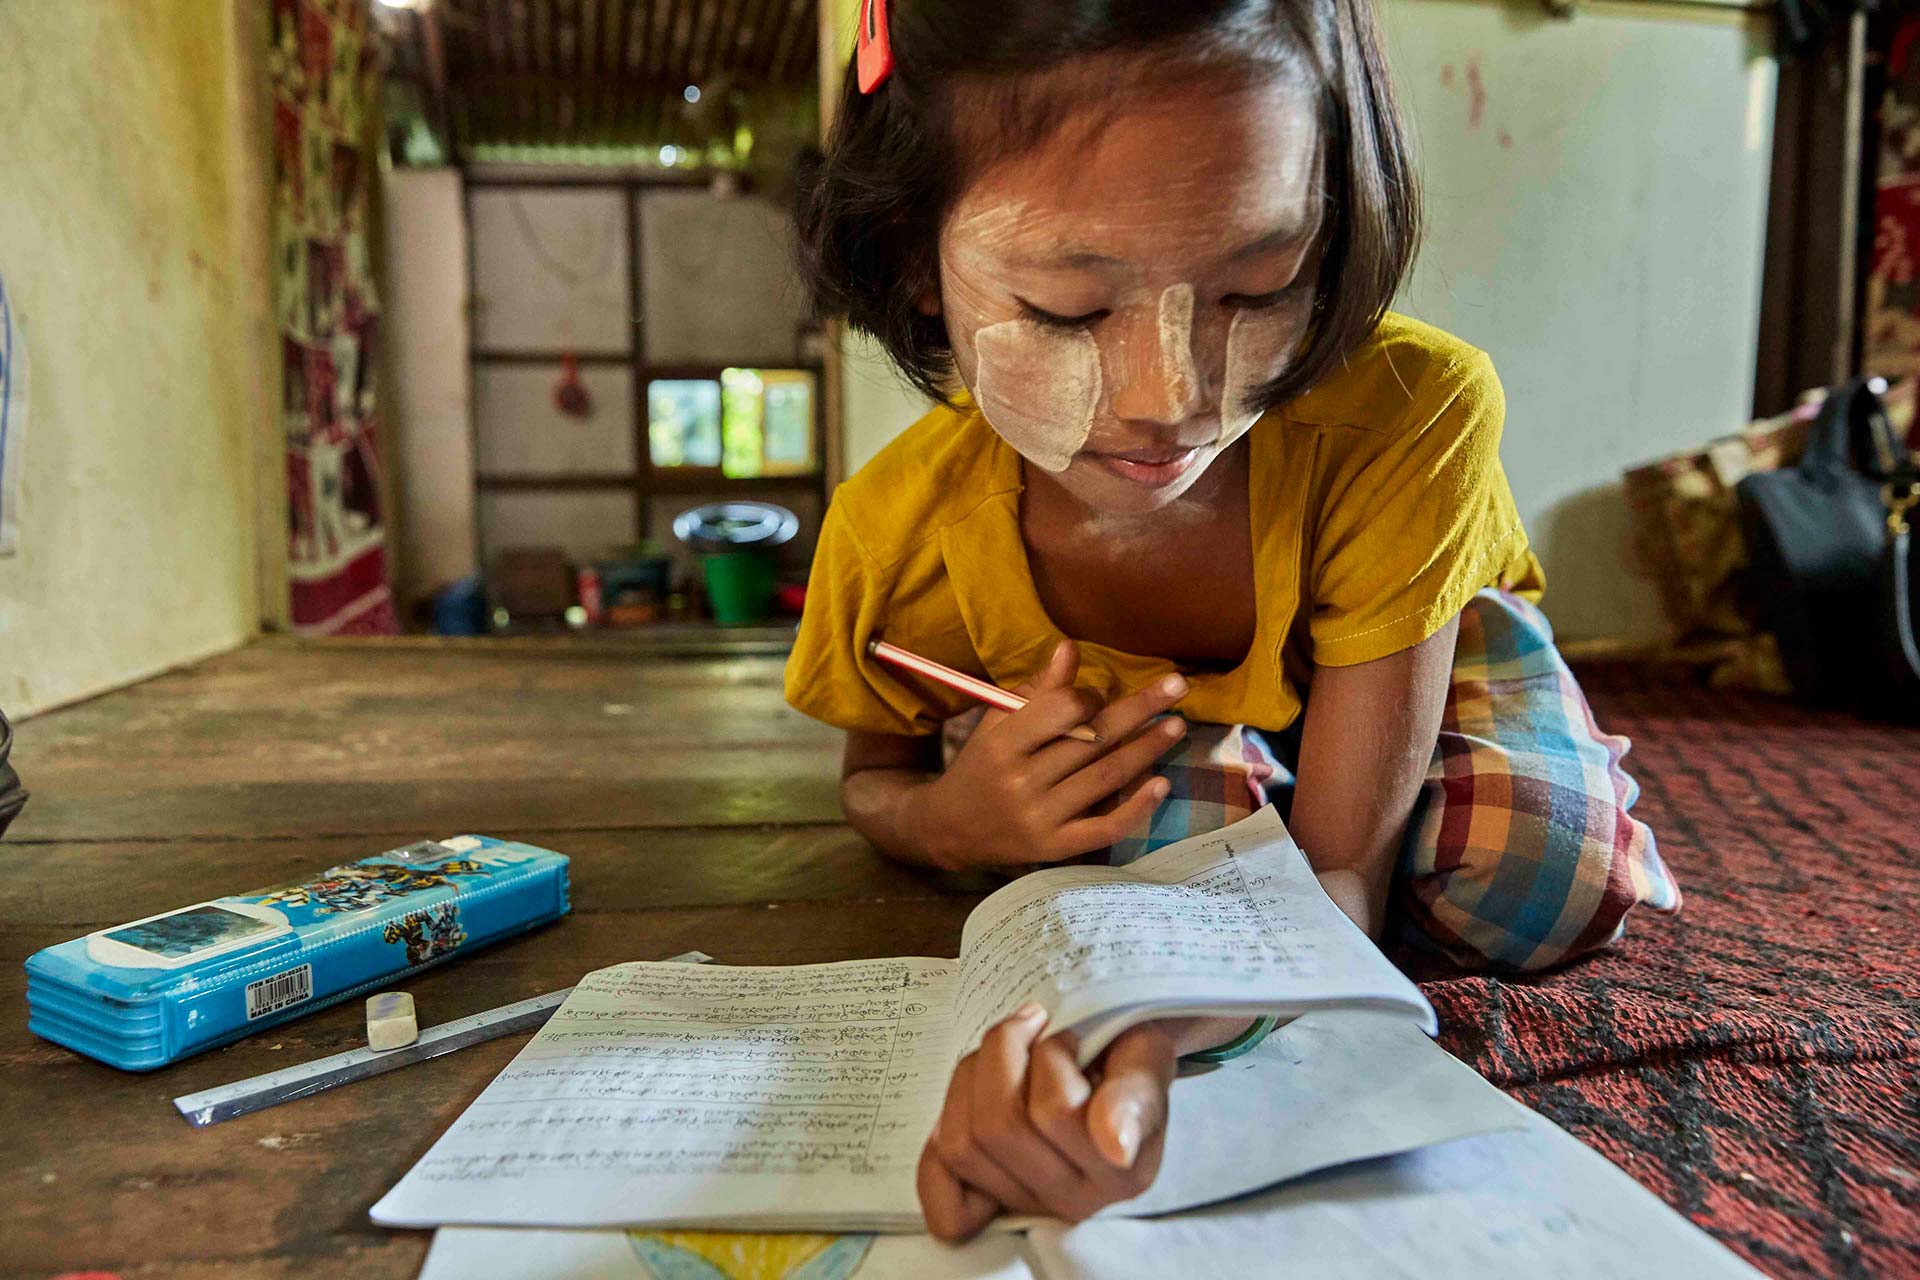 Hnin is from Myanmar and is living with type 1 diabetes. She is doing homework on the floor in her house. 